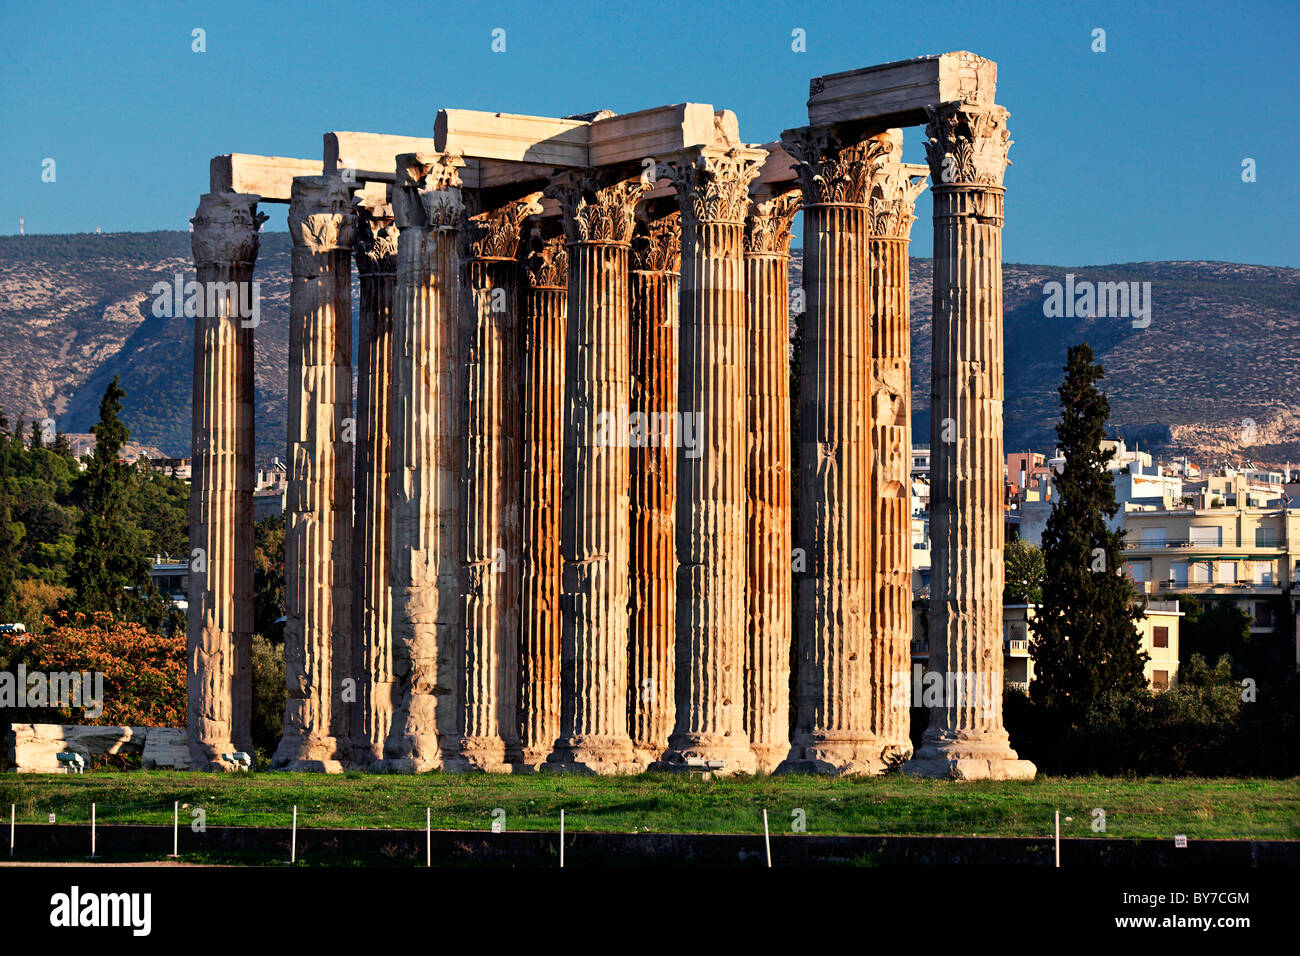 Columns of the Corinthian order, from the Temple of Olympian Zeus, Athens, Greece Stock Photo